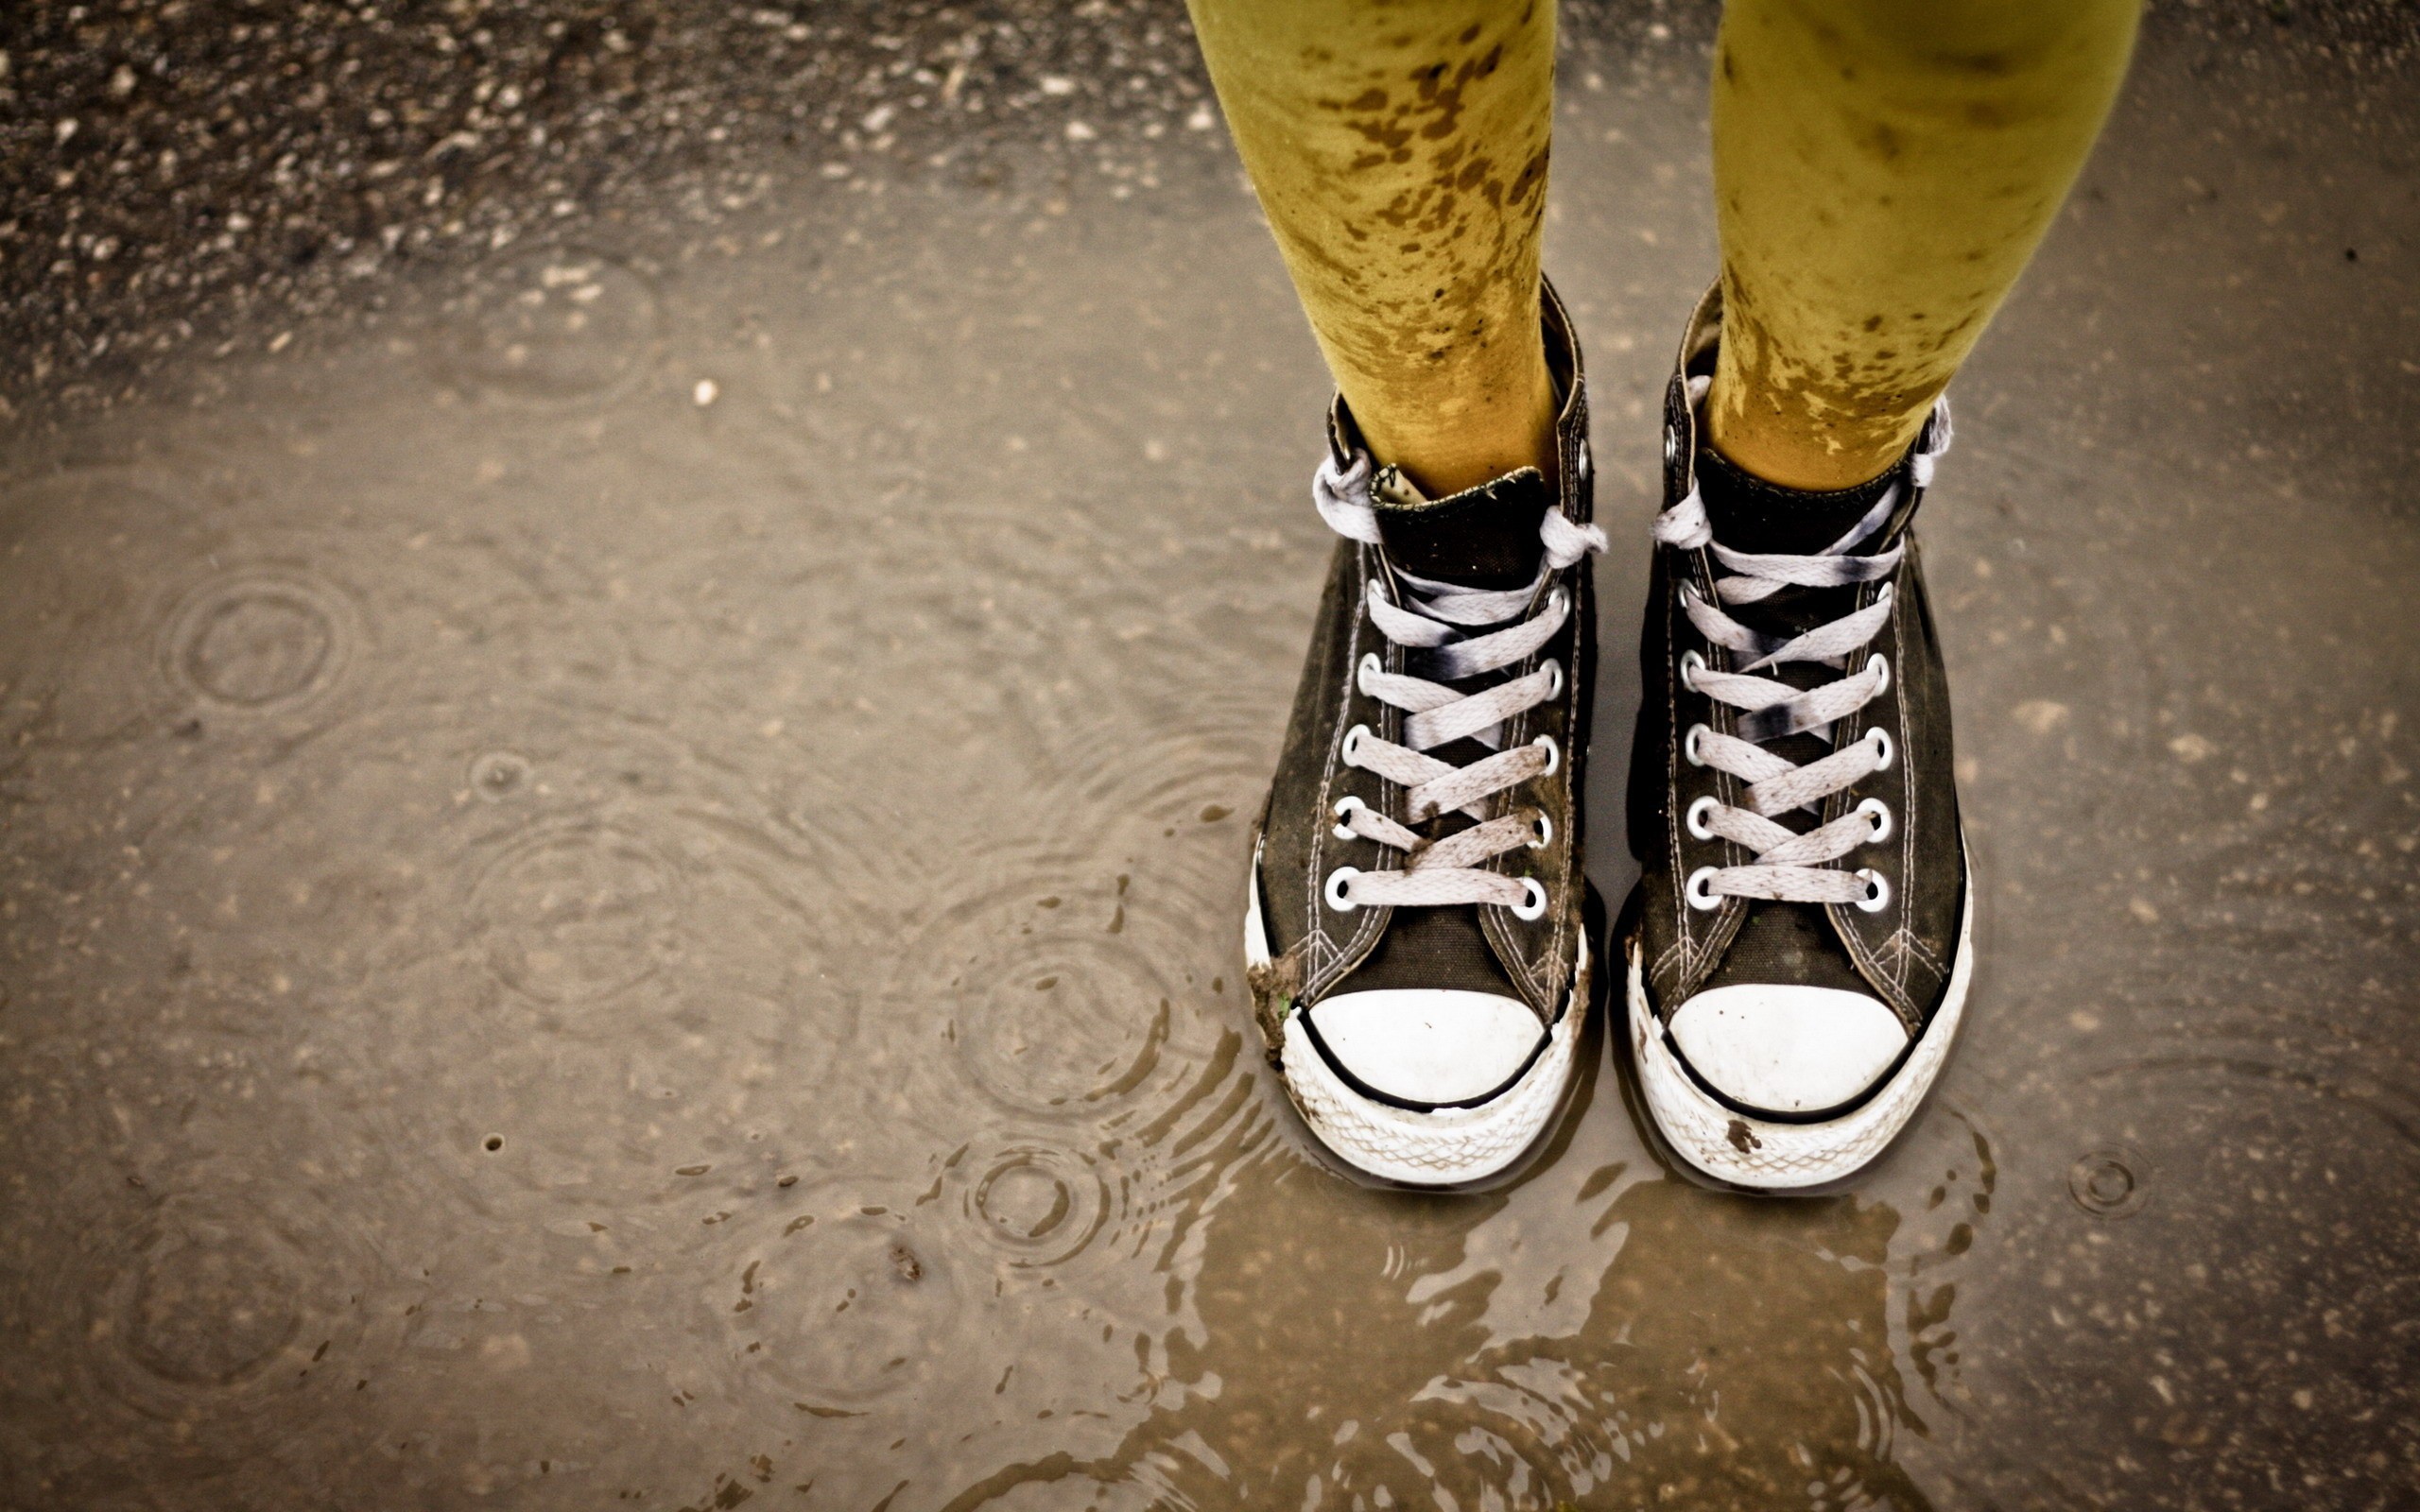 products, converse, puddle, shoe, sneakers